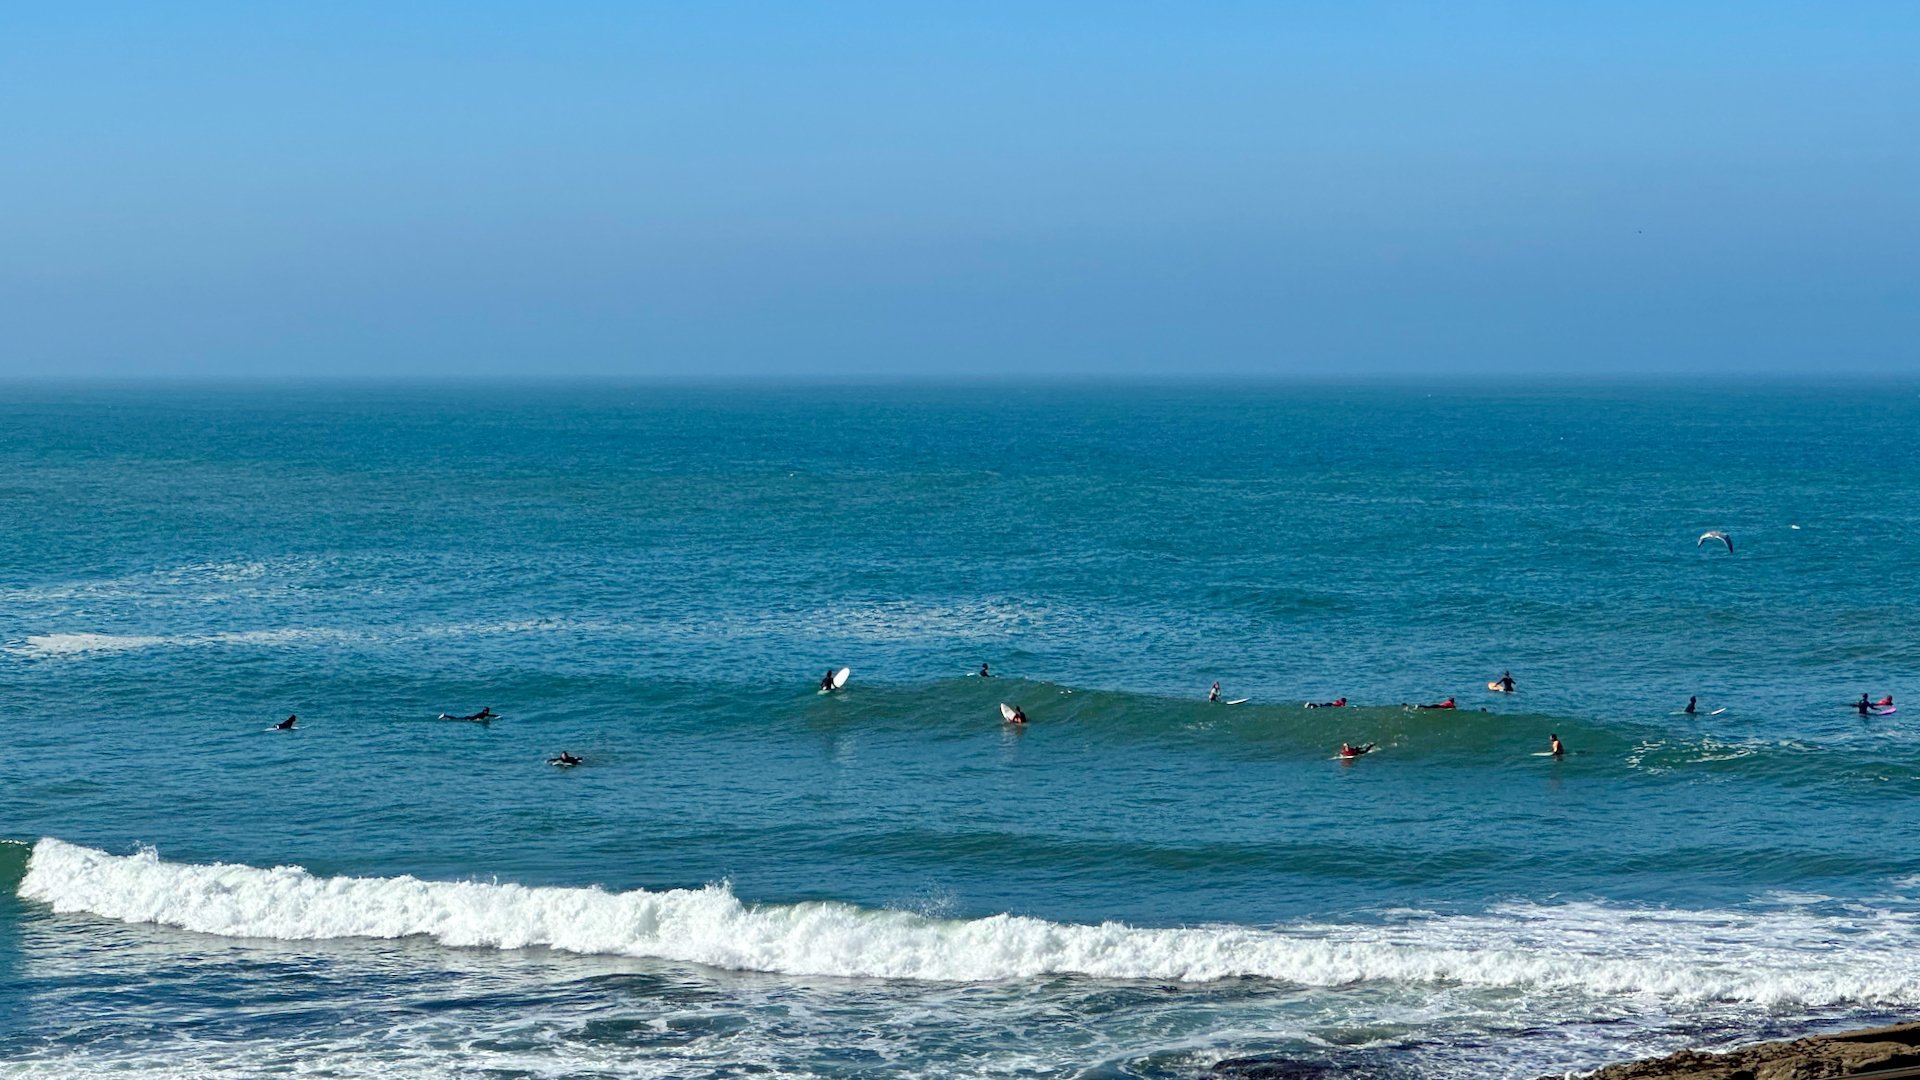  It was easily the most surfers we had seen on the trip. 